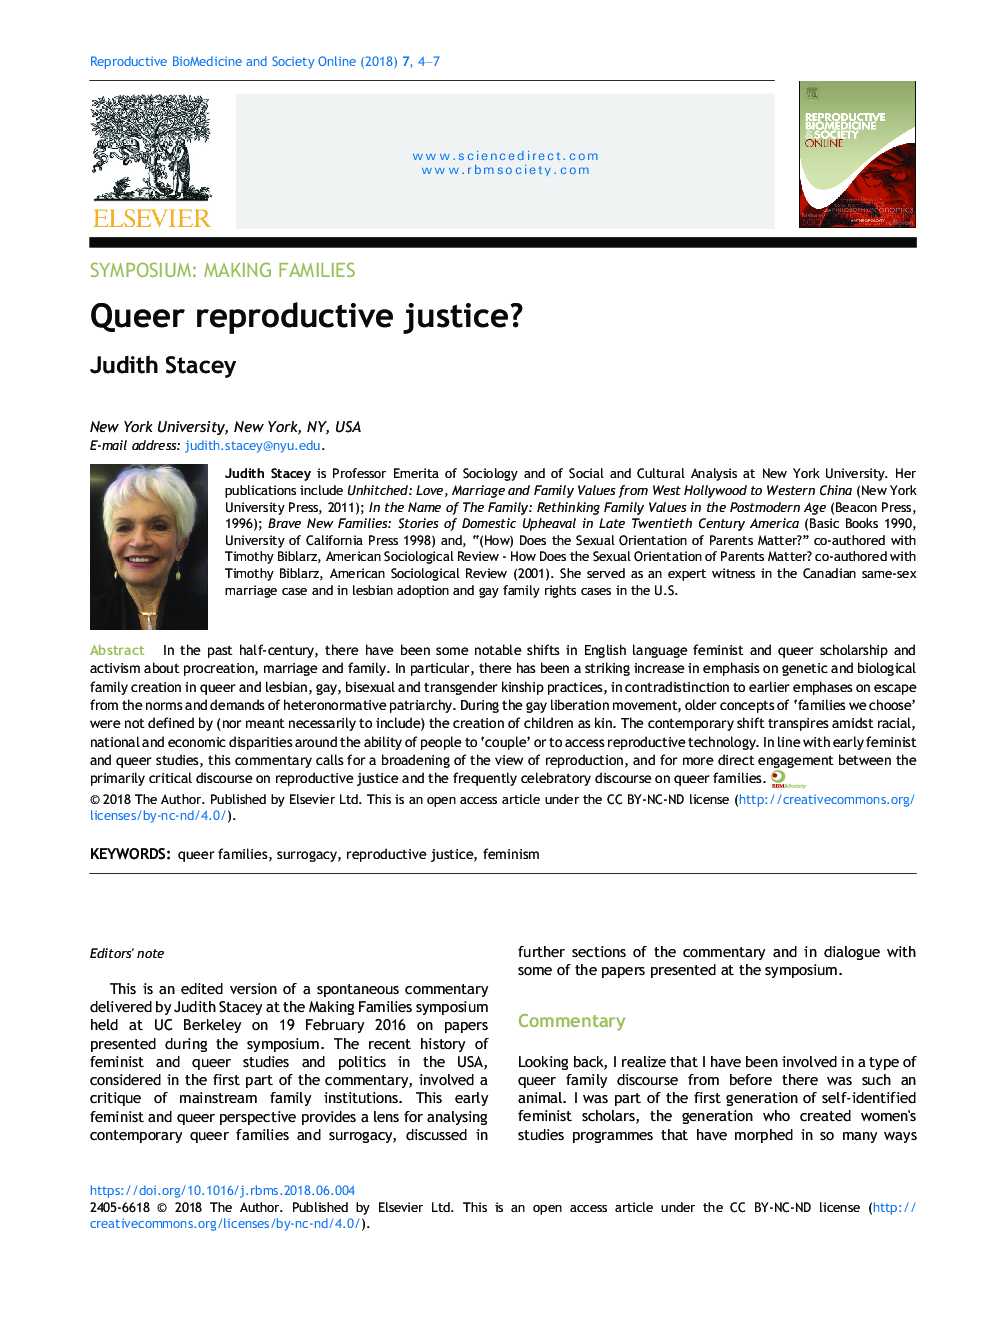 Queer reproductive justice?